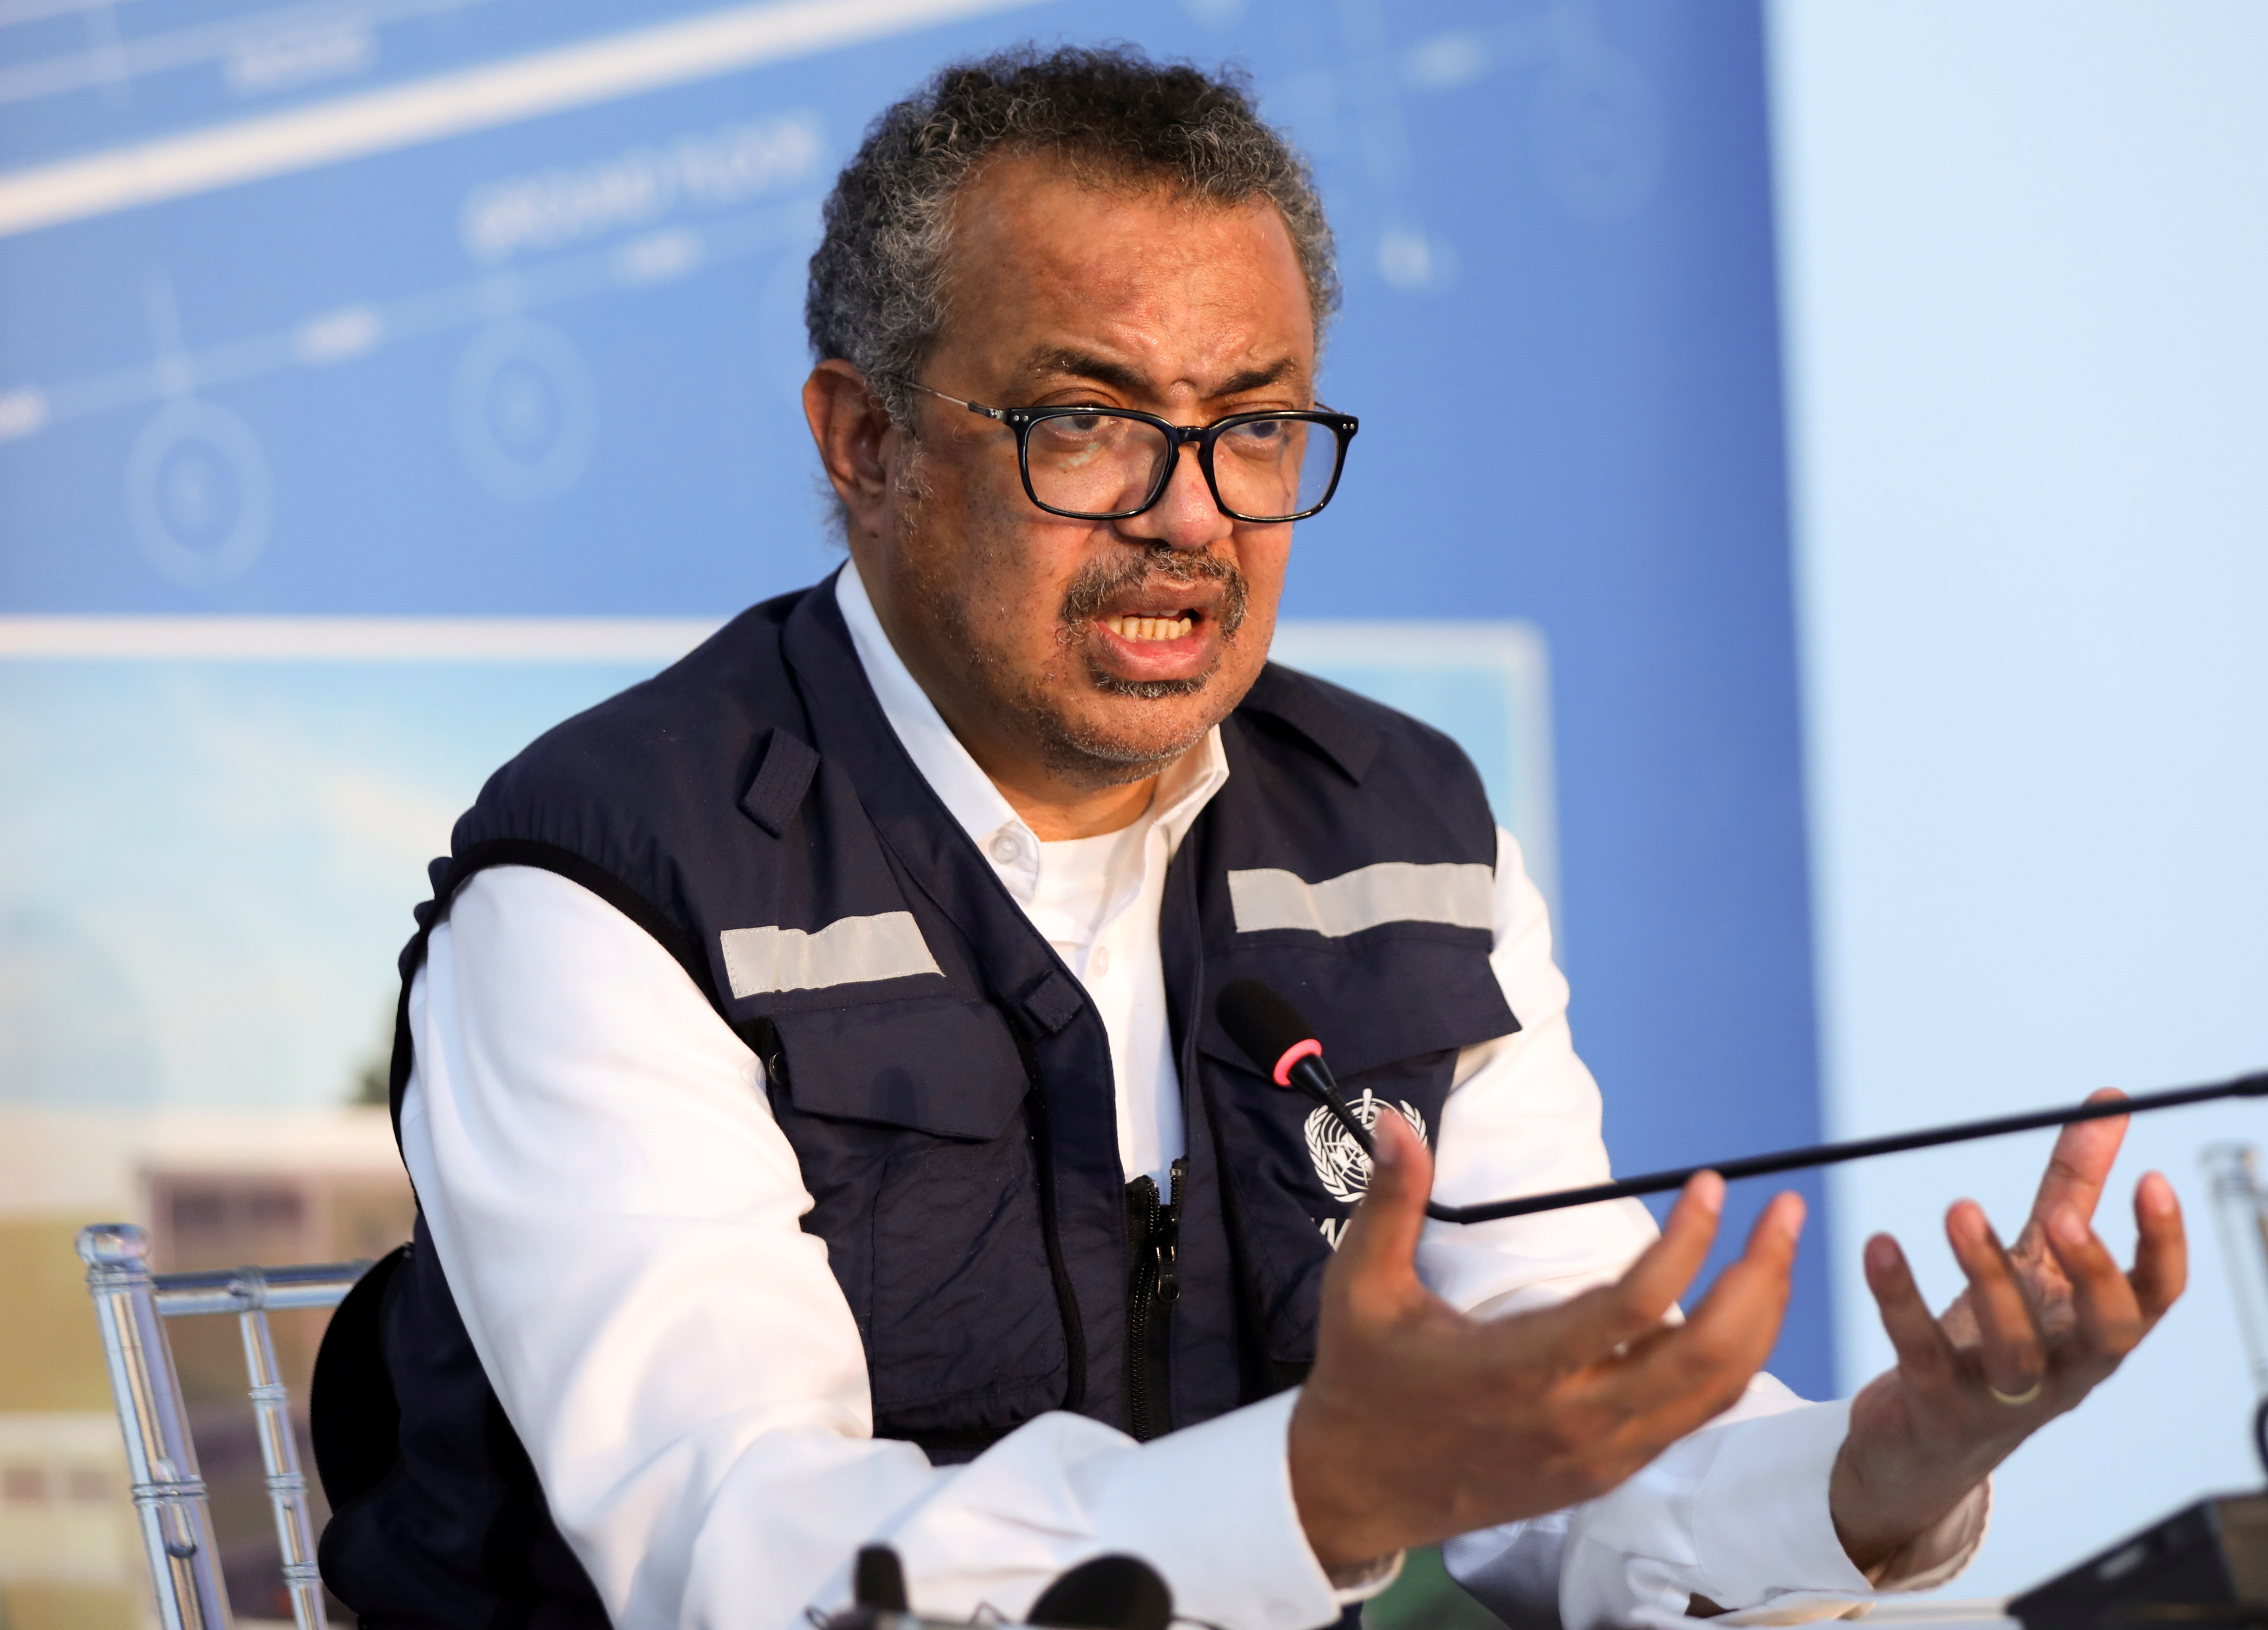 World Health Organization (WHO) Director-General Tedros Adhanom Ghebreyesus, gestures during a news conference in Beirut